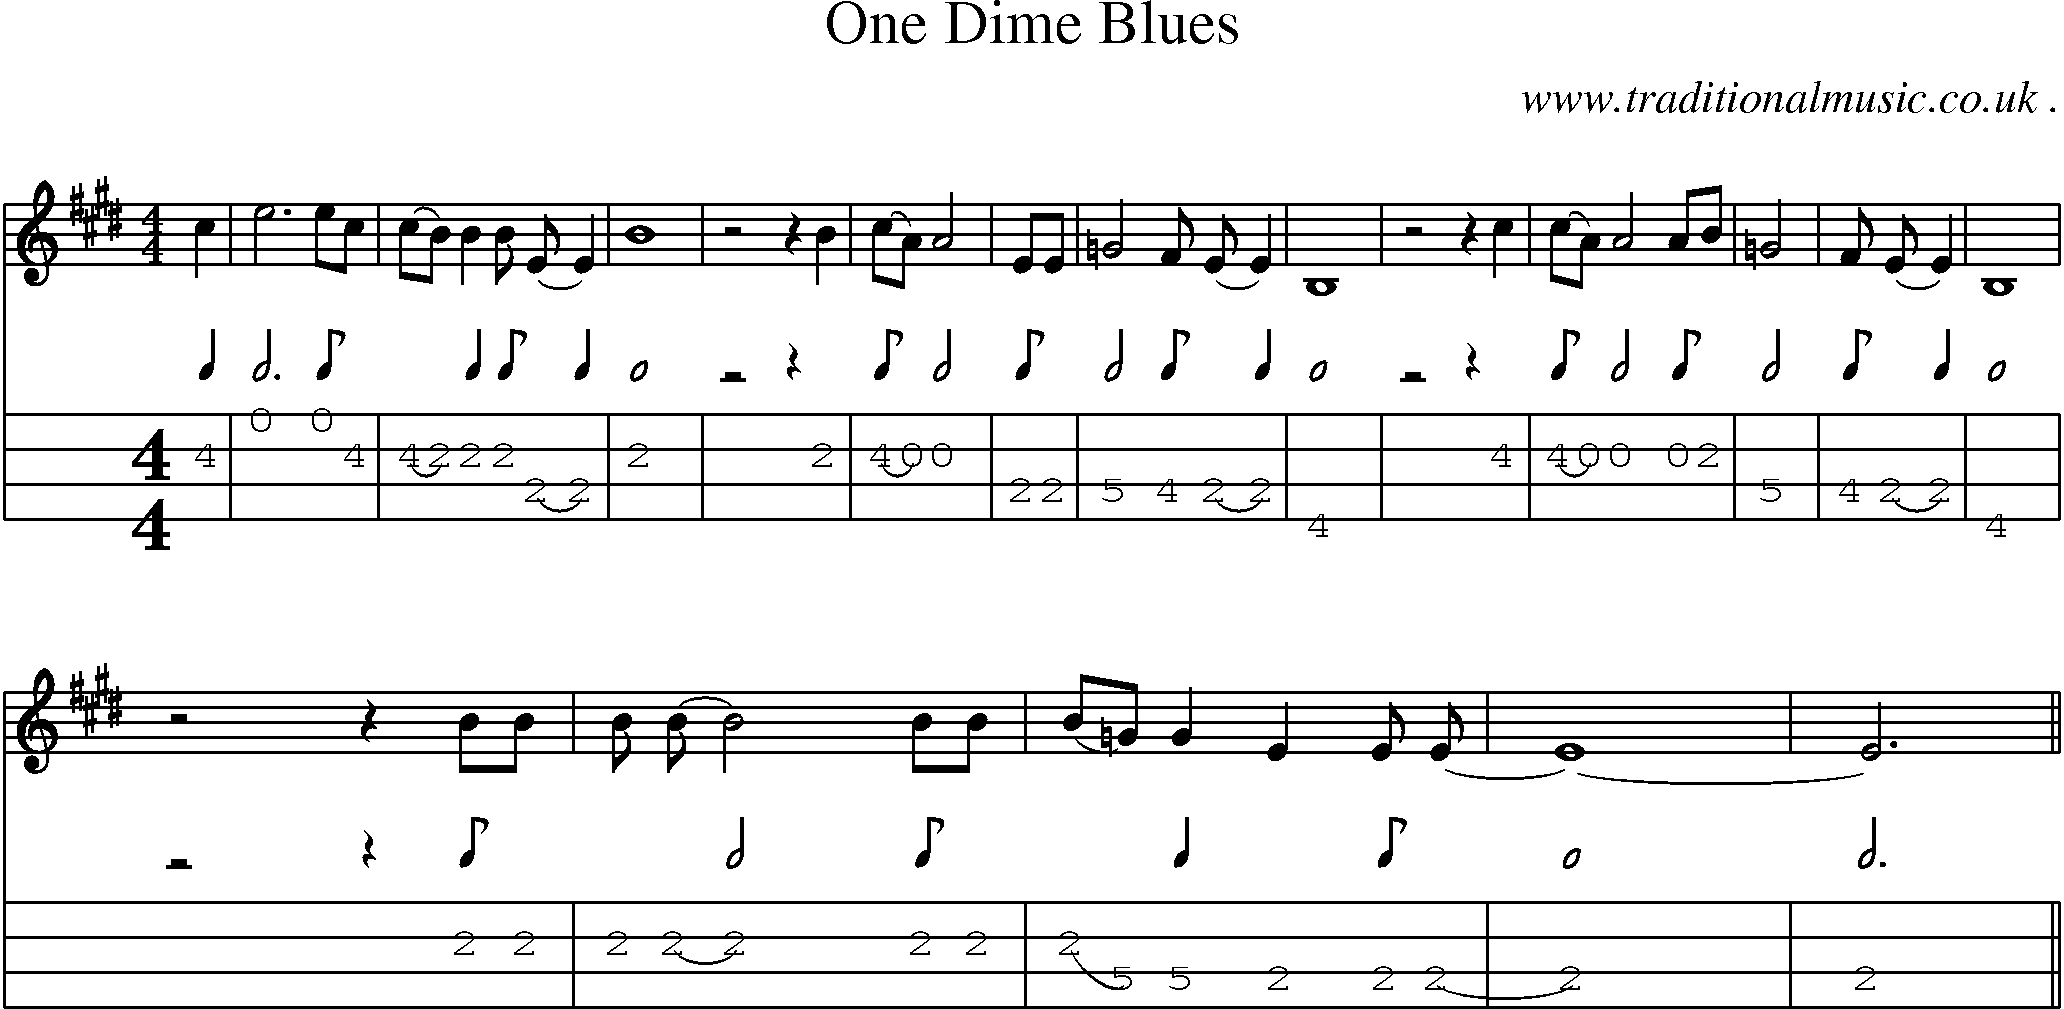 Music Score and Mandolin Tabs for One Dime Blues